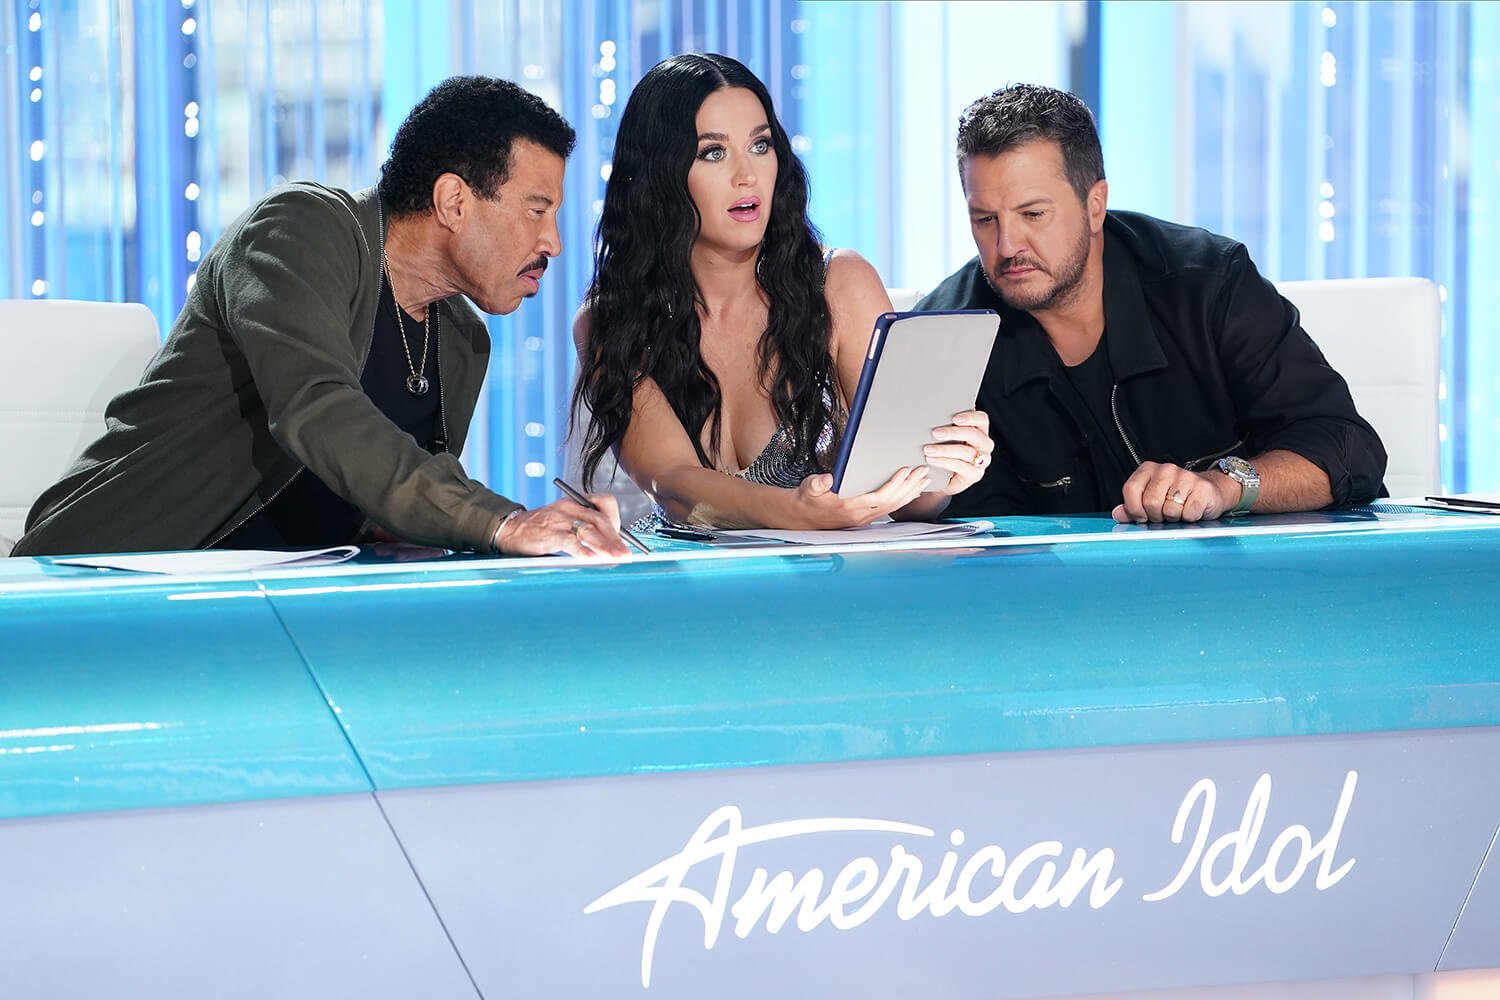 Lionel Richie, Katy Perry, and Luke Bryan lean over an iPad at the judges' table on American Idol